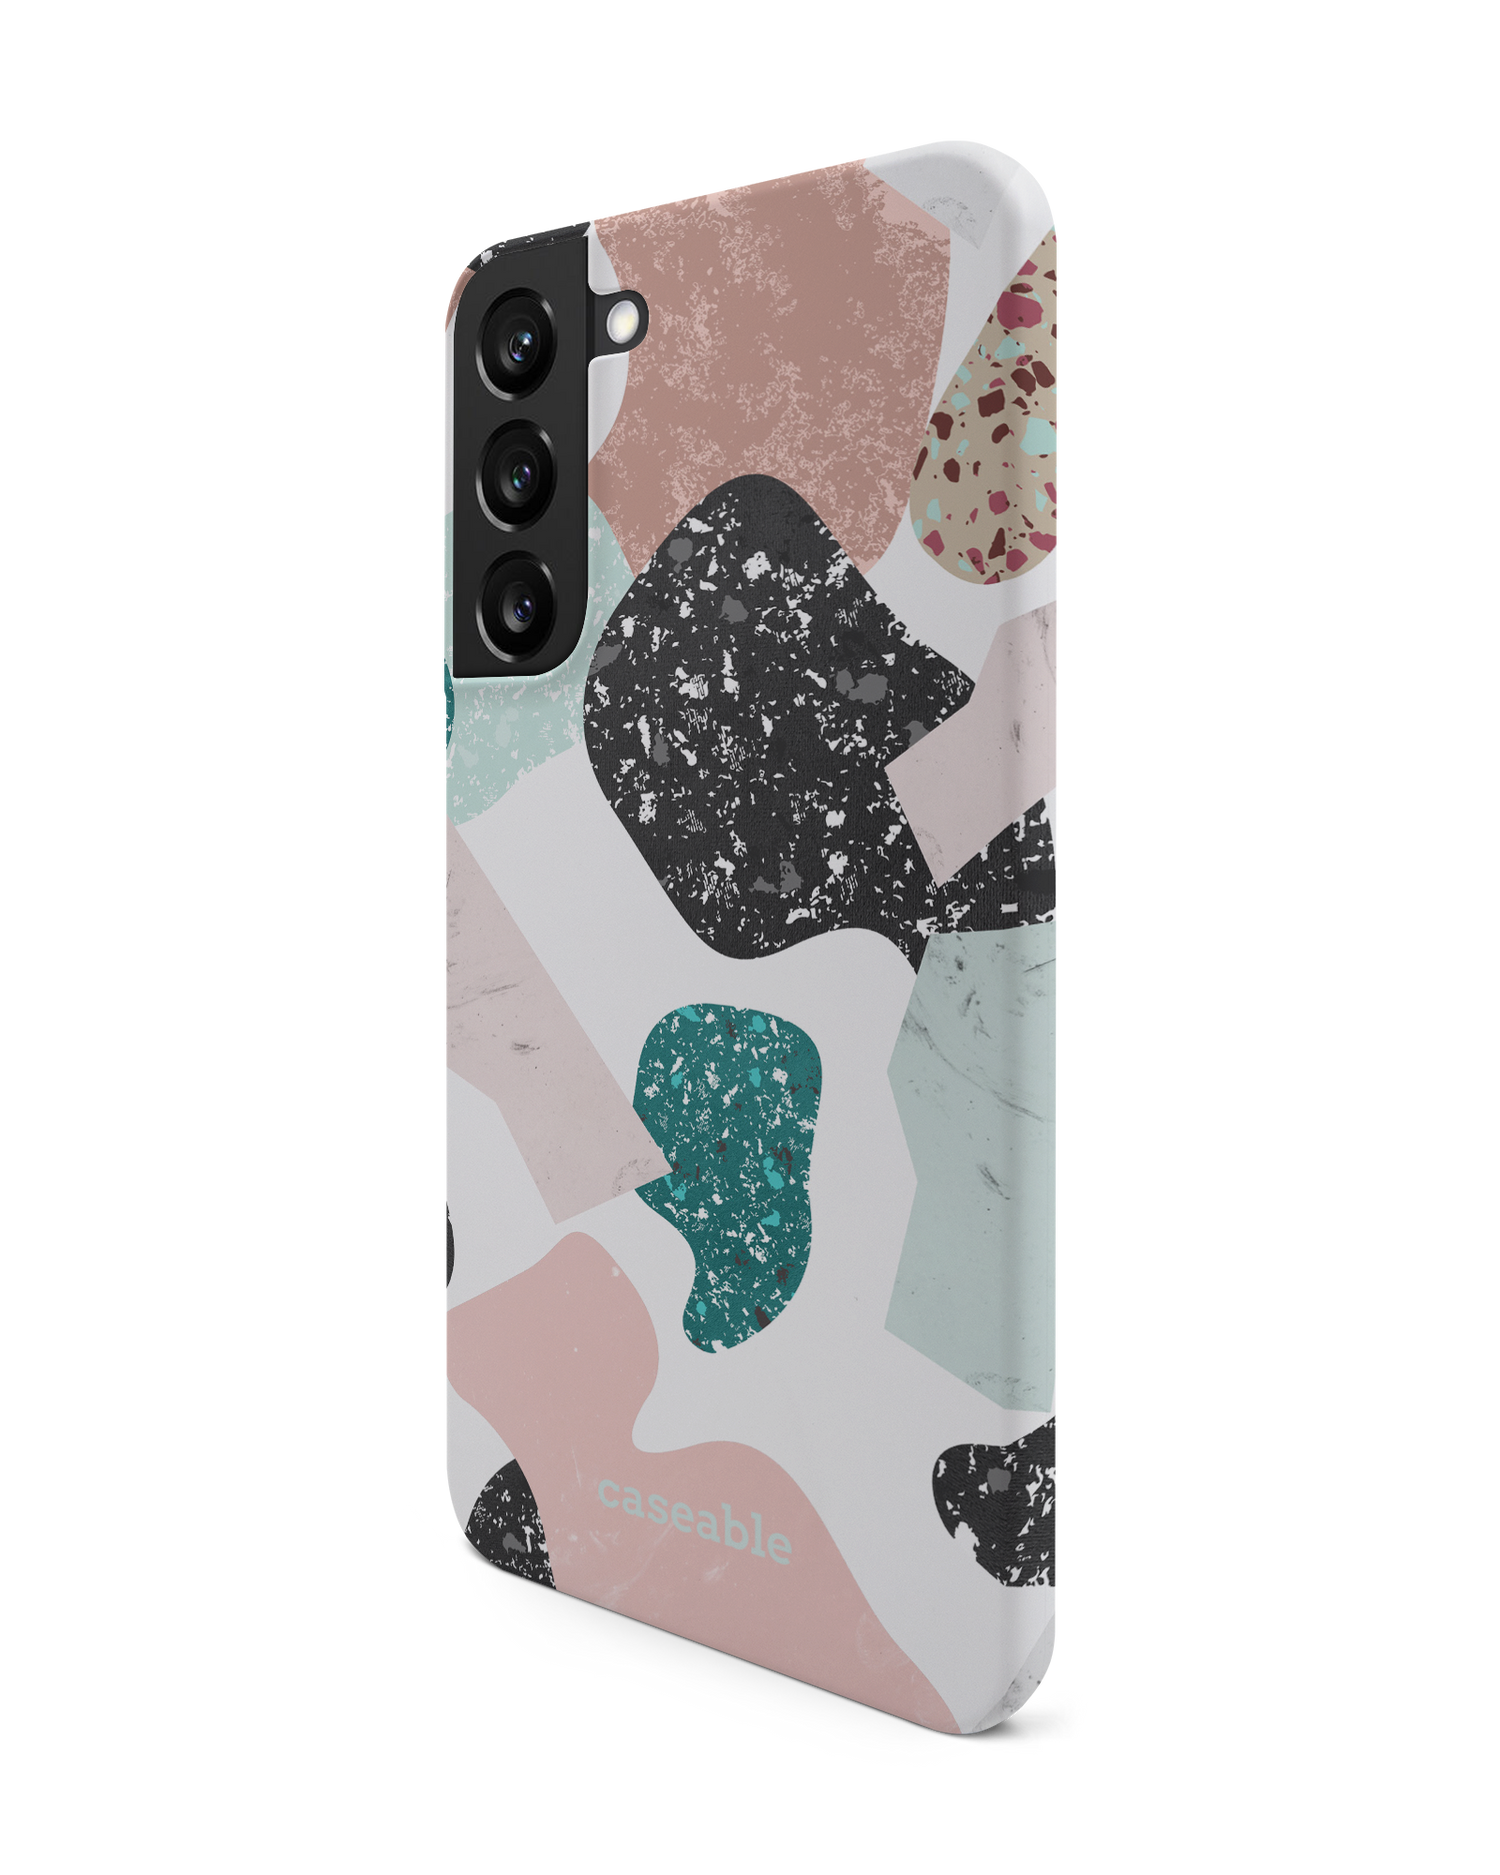 Scattered Shapes Hard Shell Phone Case Samsung Galaxy S22 Plus 5G: View from the right side